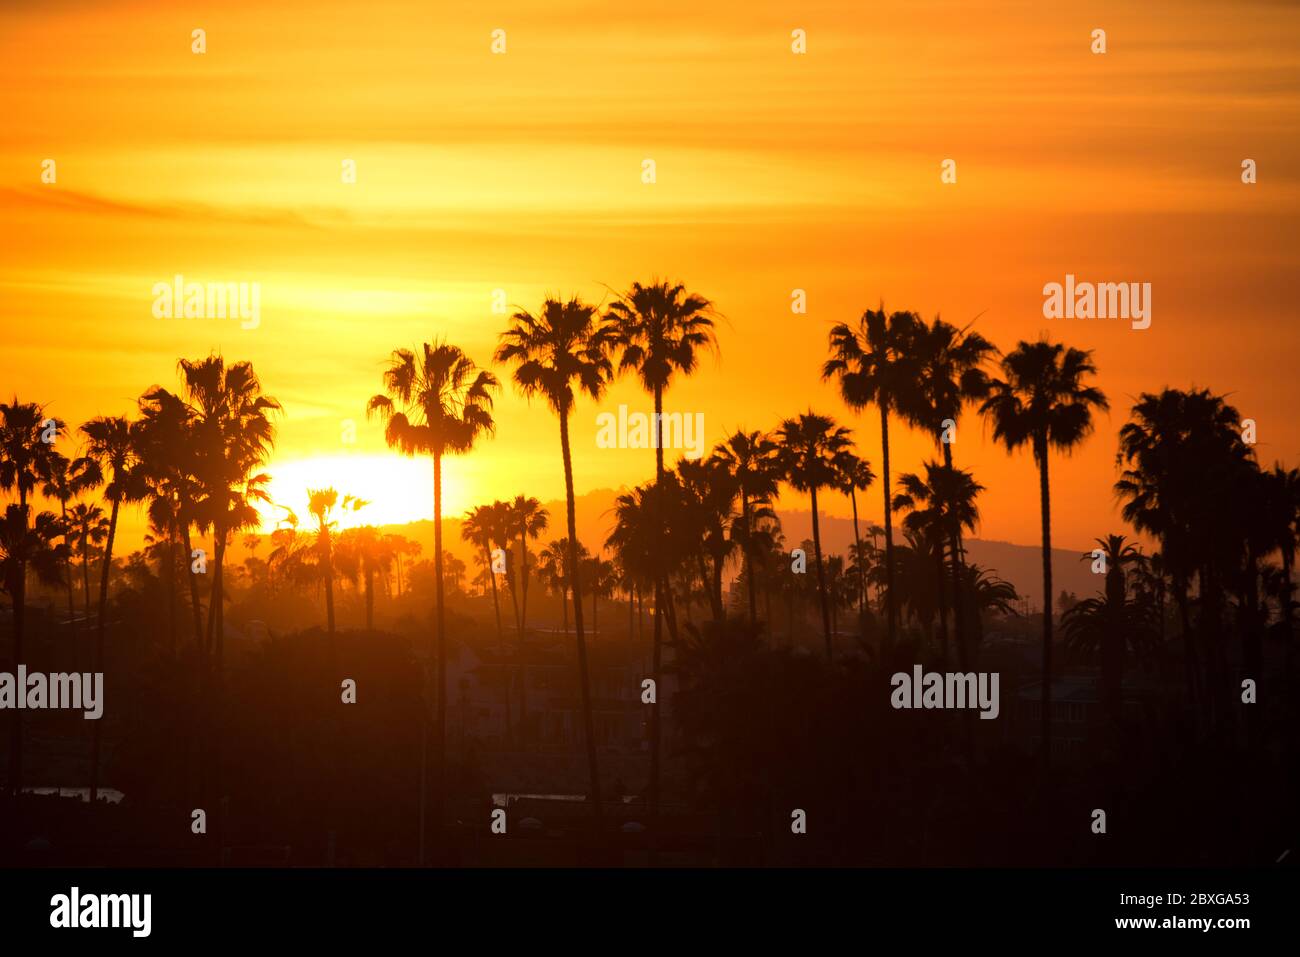 Silhouette of palm trees at sunset, Orange County, California, USA Stock Photo